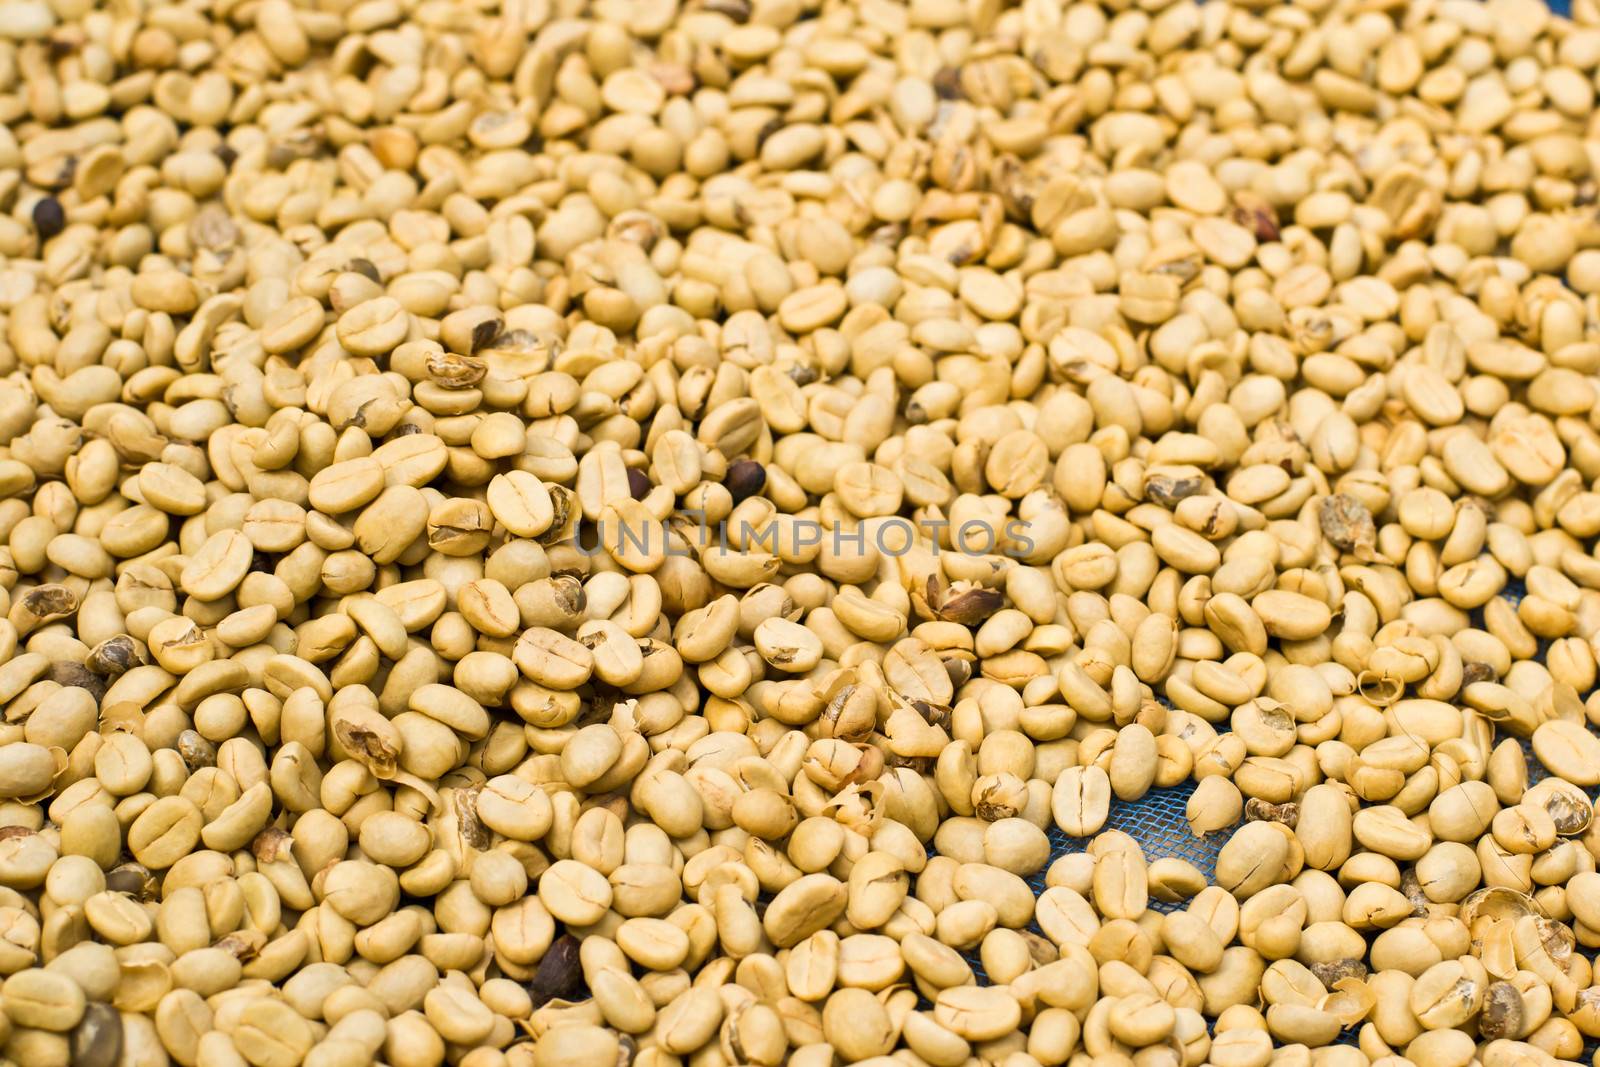 Close-up of coffee beans background